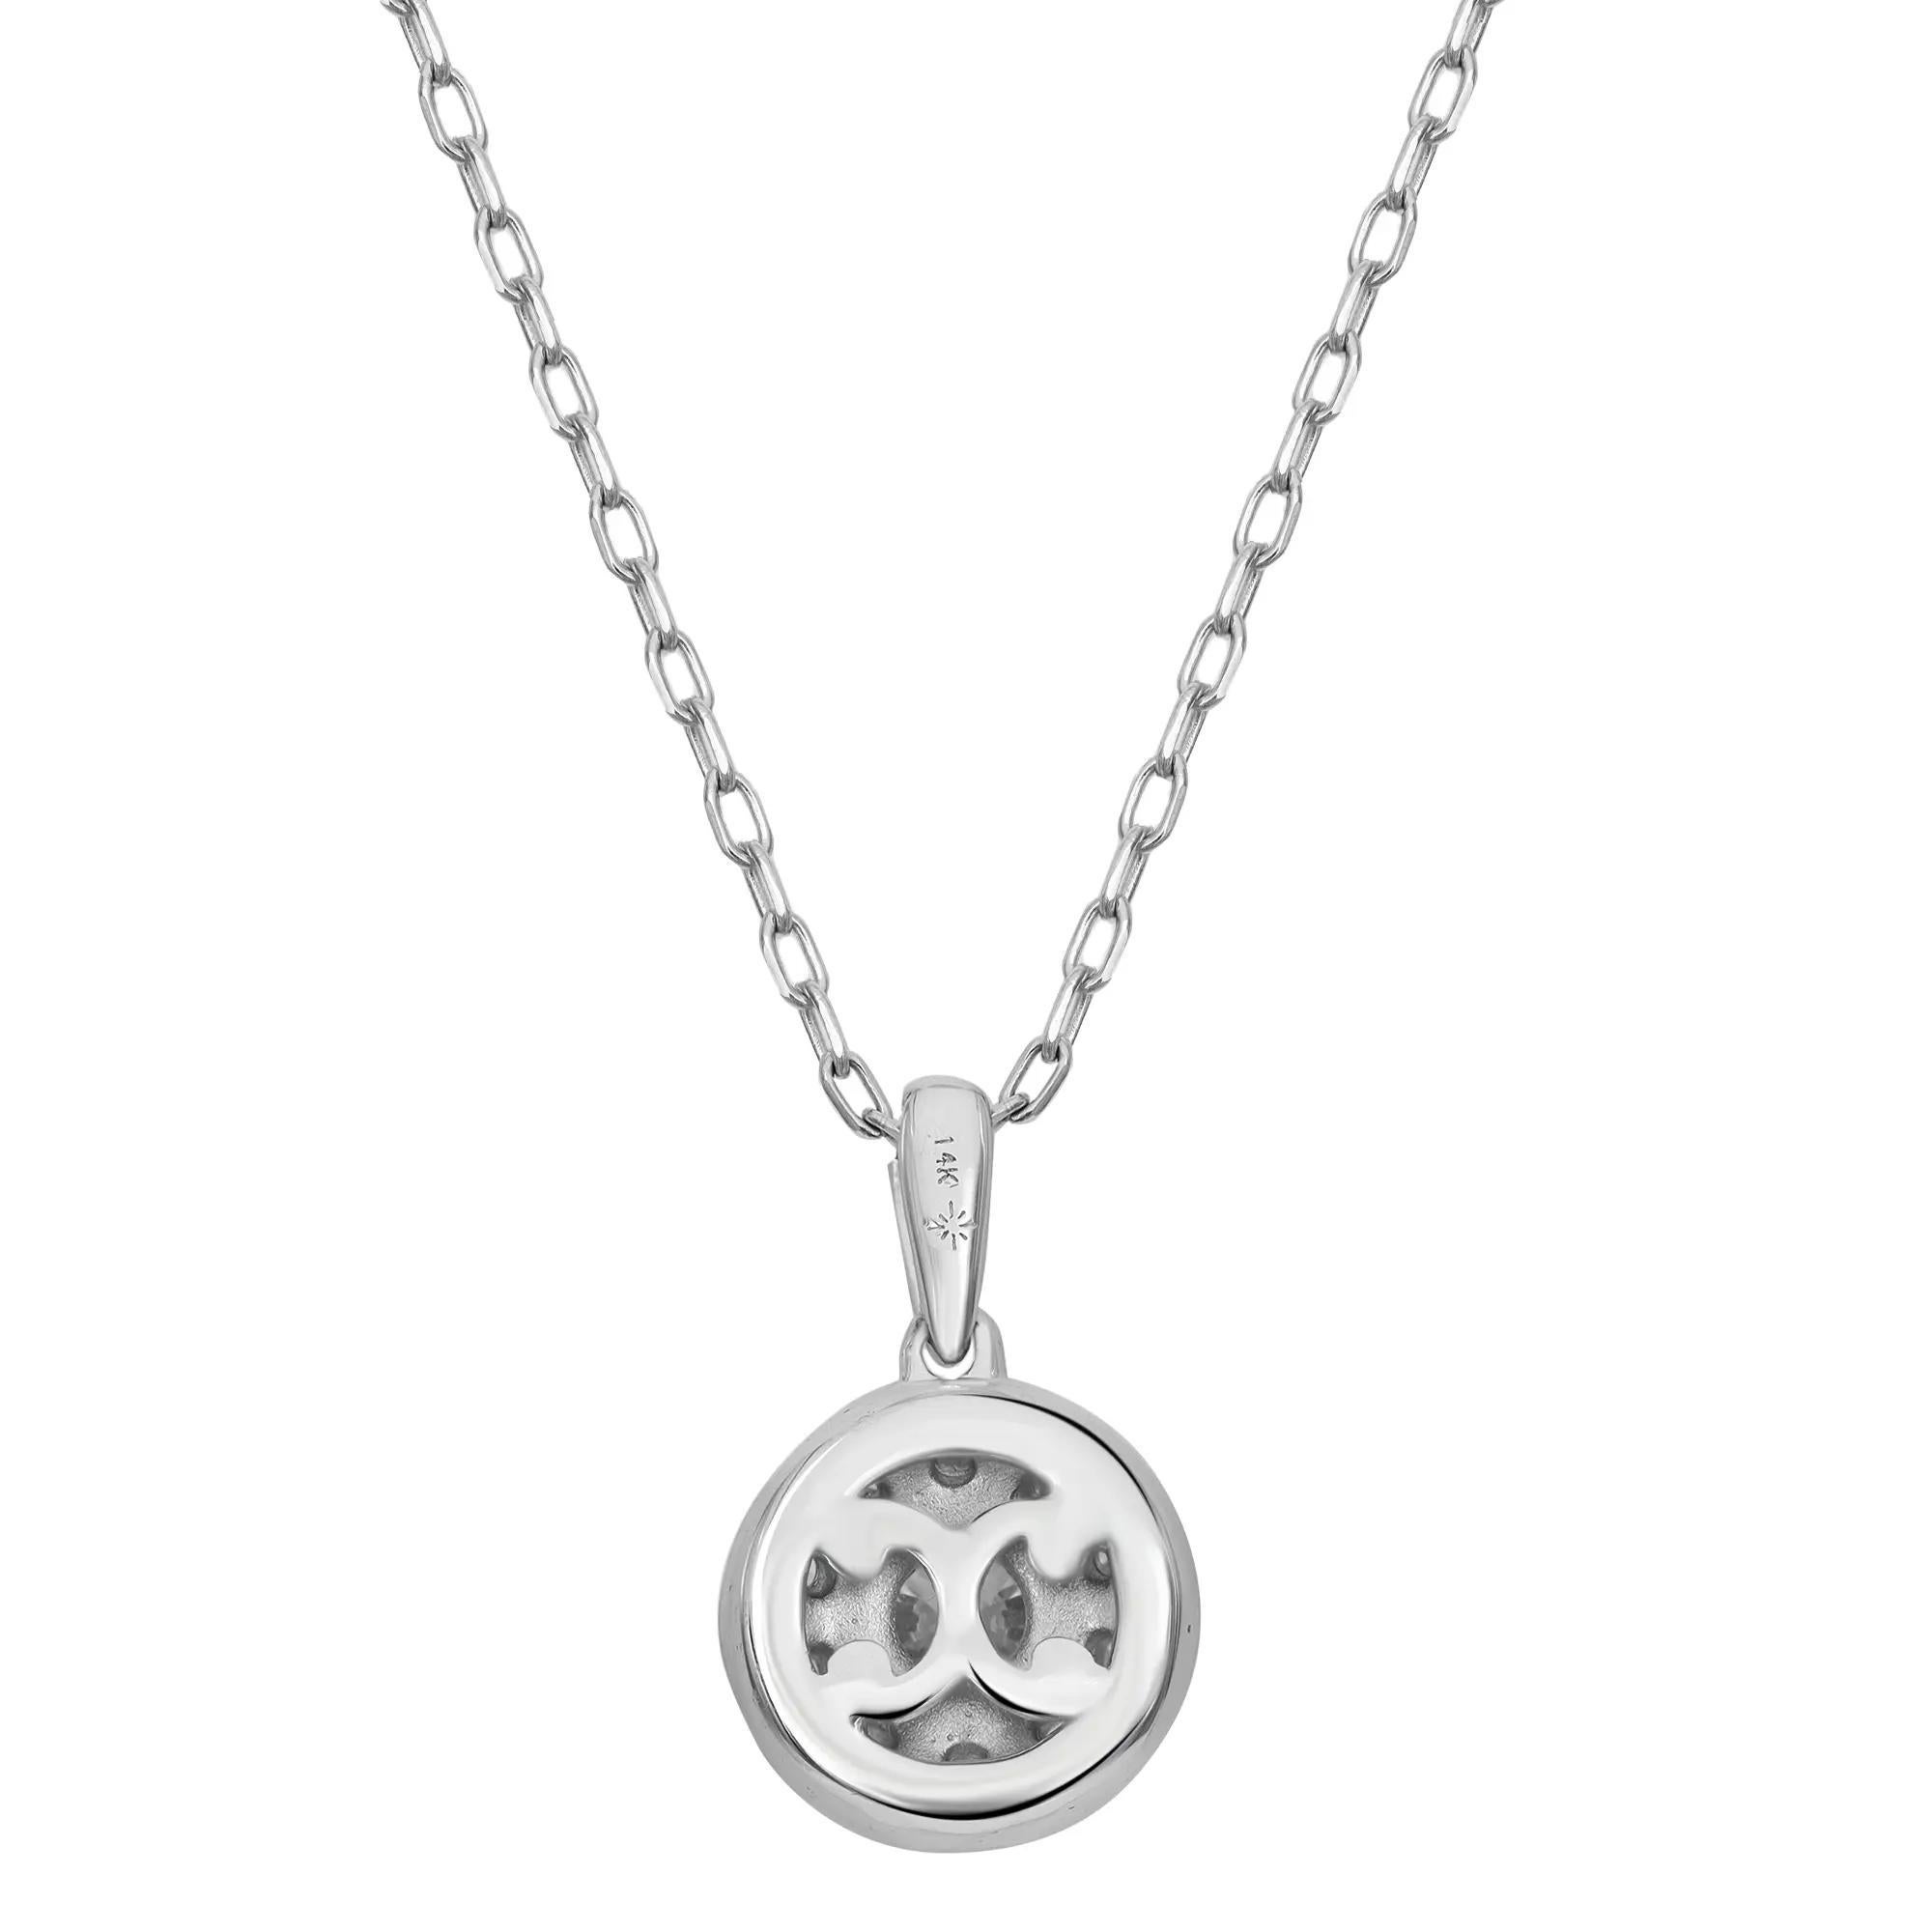 This beautiful diamond pendant necklace is a must have for your jewelry collection. Crafted in fine 14K white gold. It features a center prong set diamond weighing 0.50 carat with tiny diamonds in a halo setting giving an illusion of a bigger stone